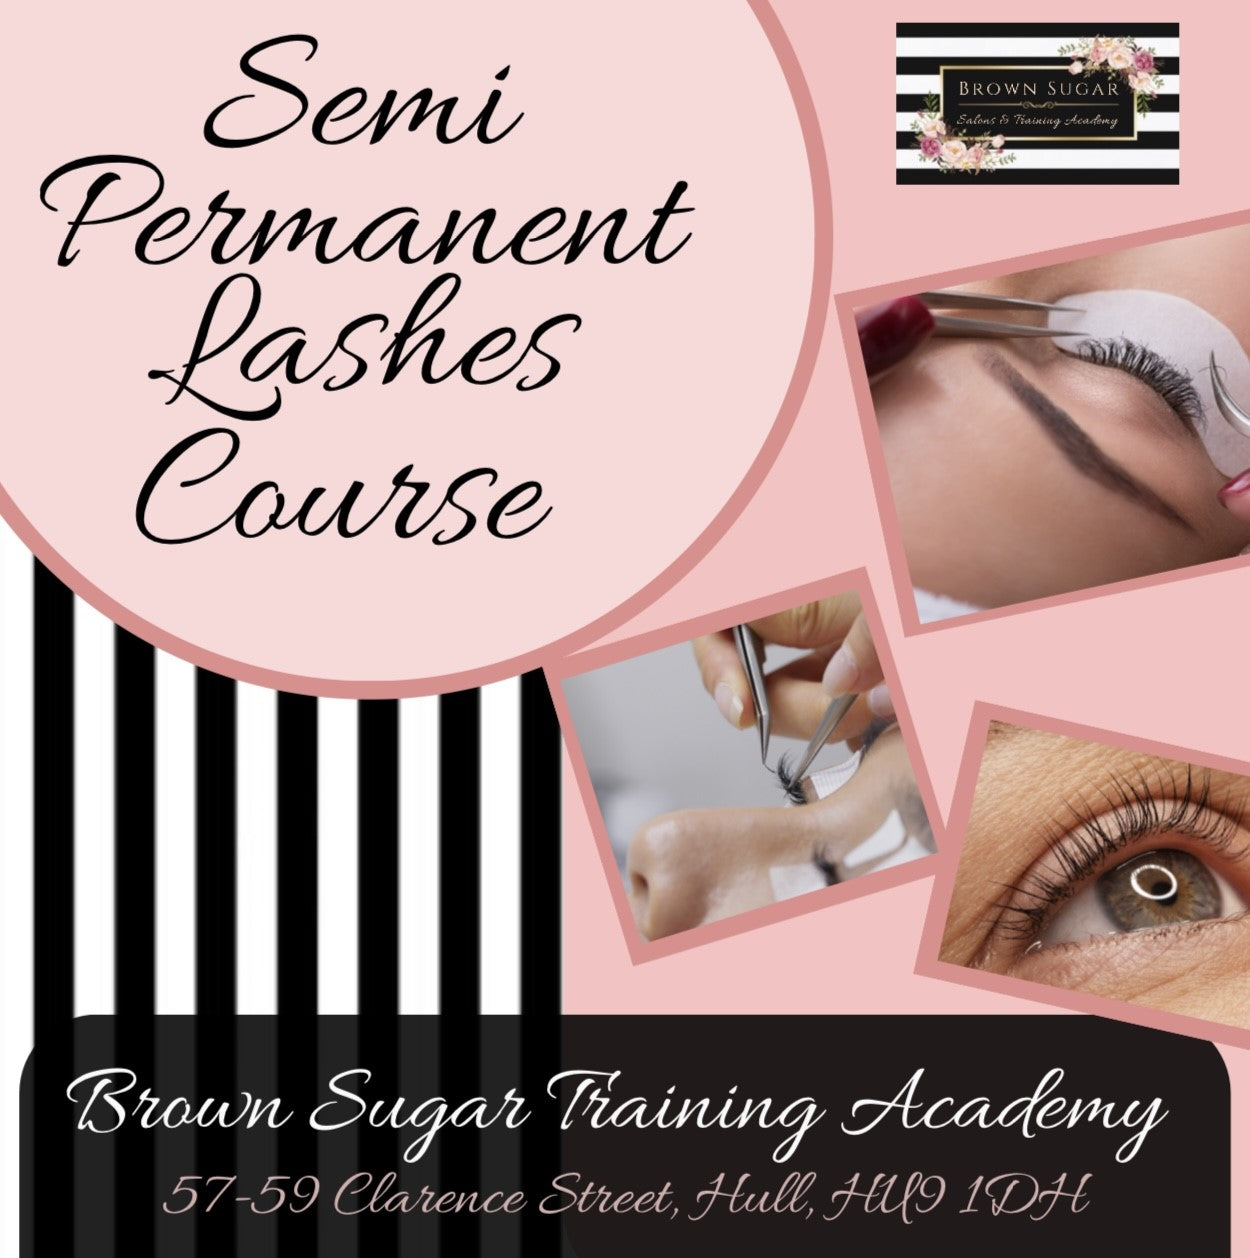 Semi Permanent Lashes Course - (PAYING BY LAYBUY)